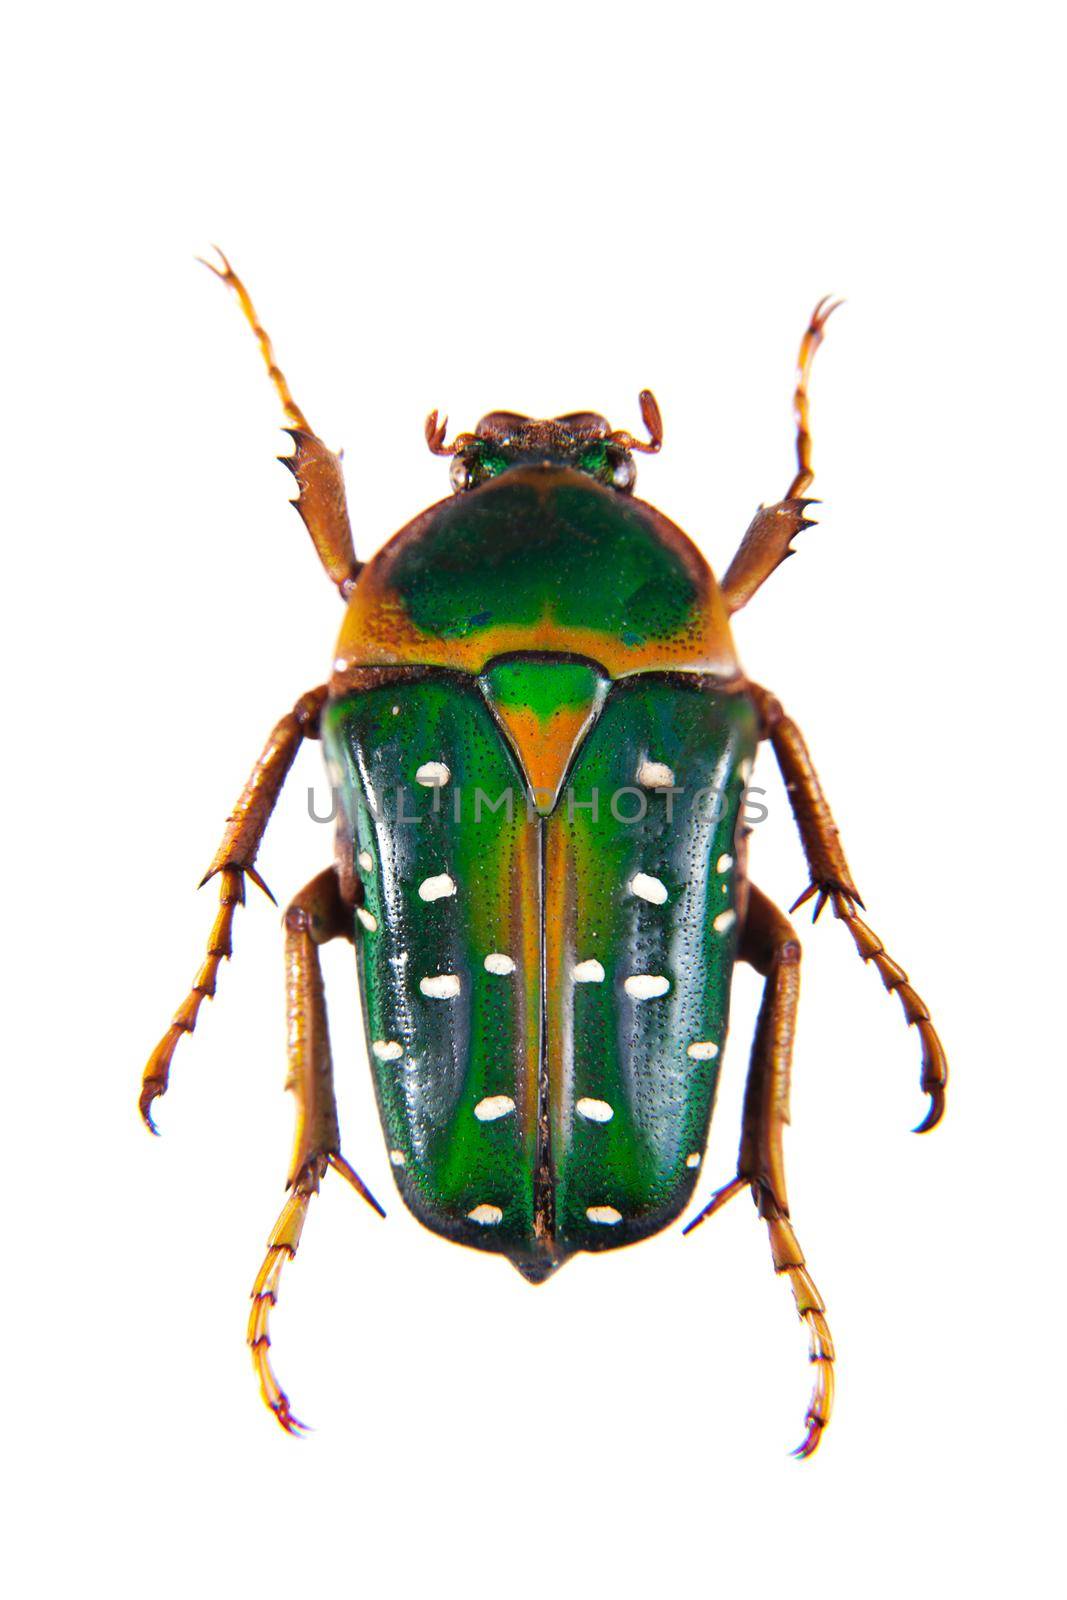 Spotted green beetle on the white background by RosaJay